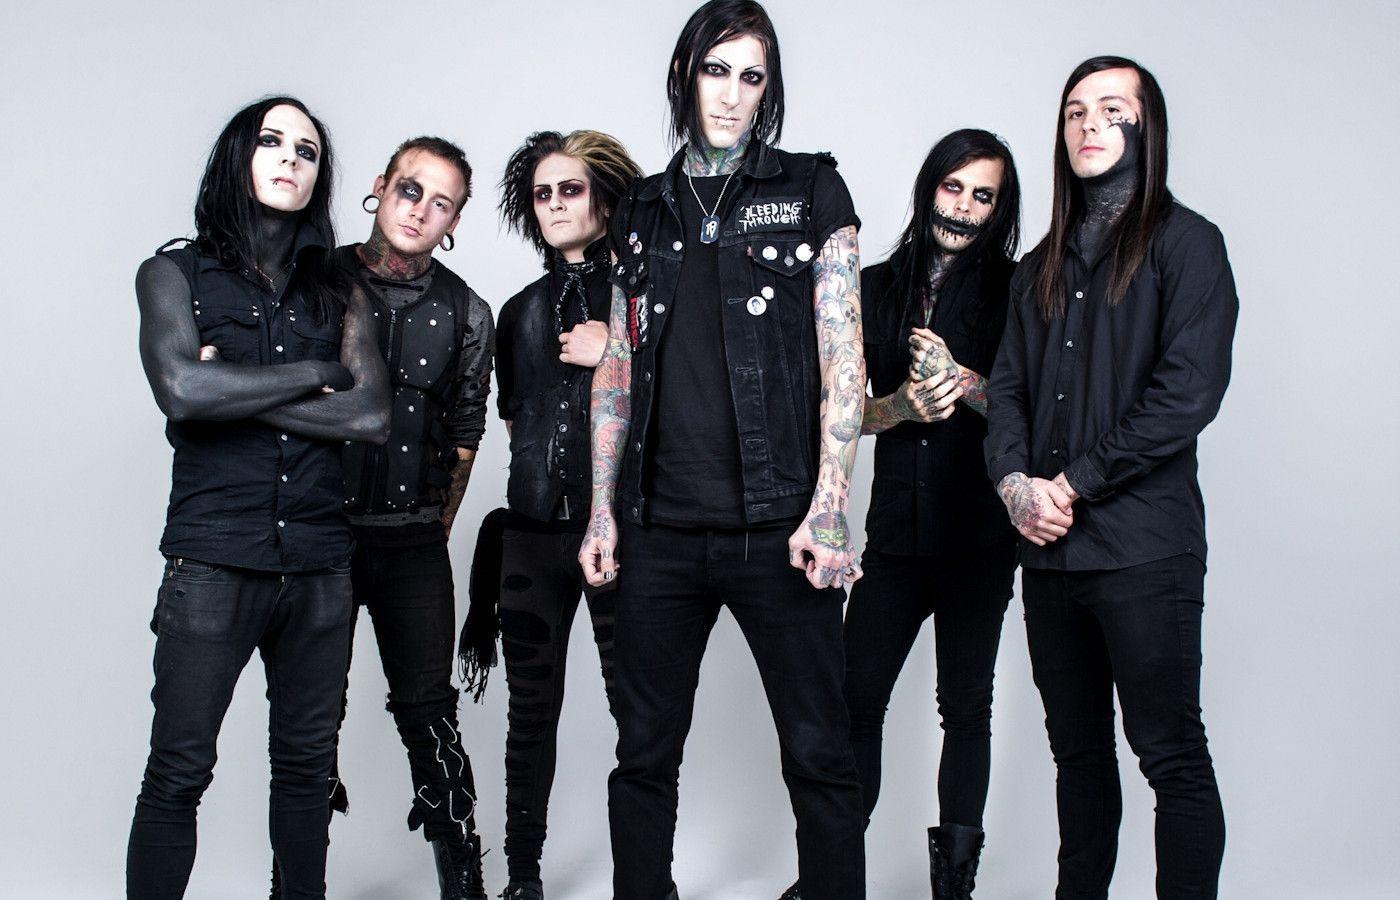 Wallpapers For > Motionless In White Wallpapers 1920x1080